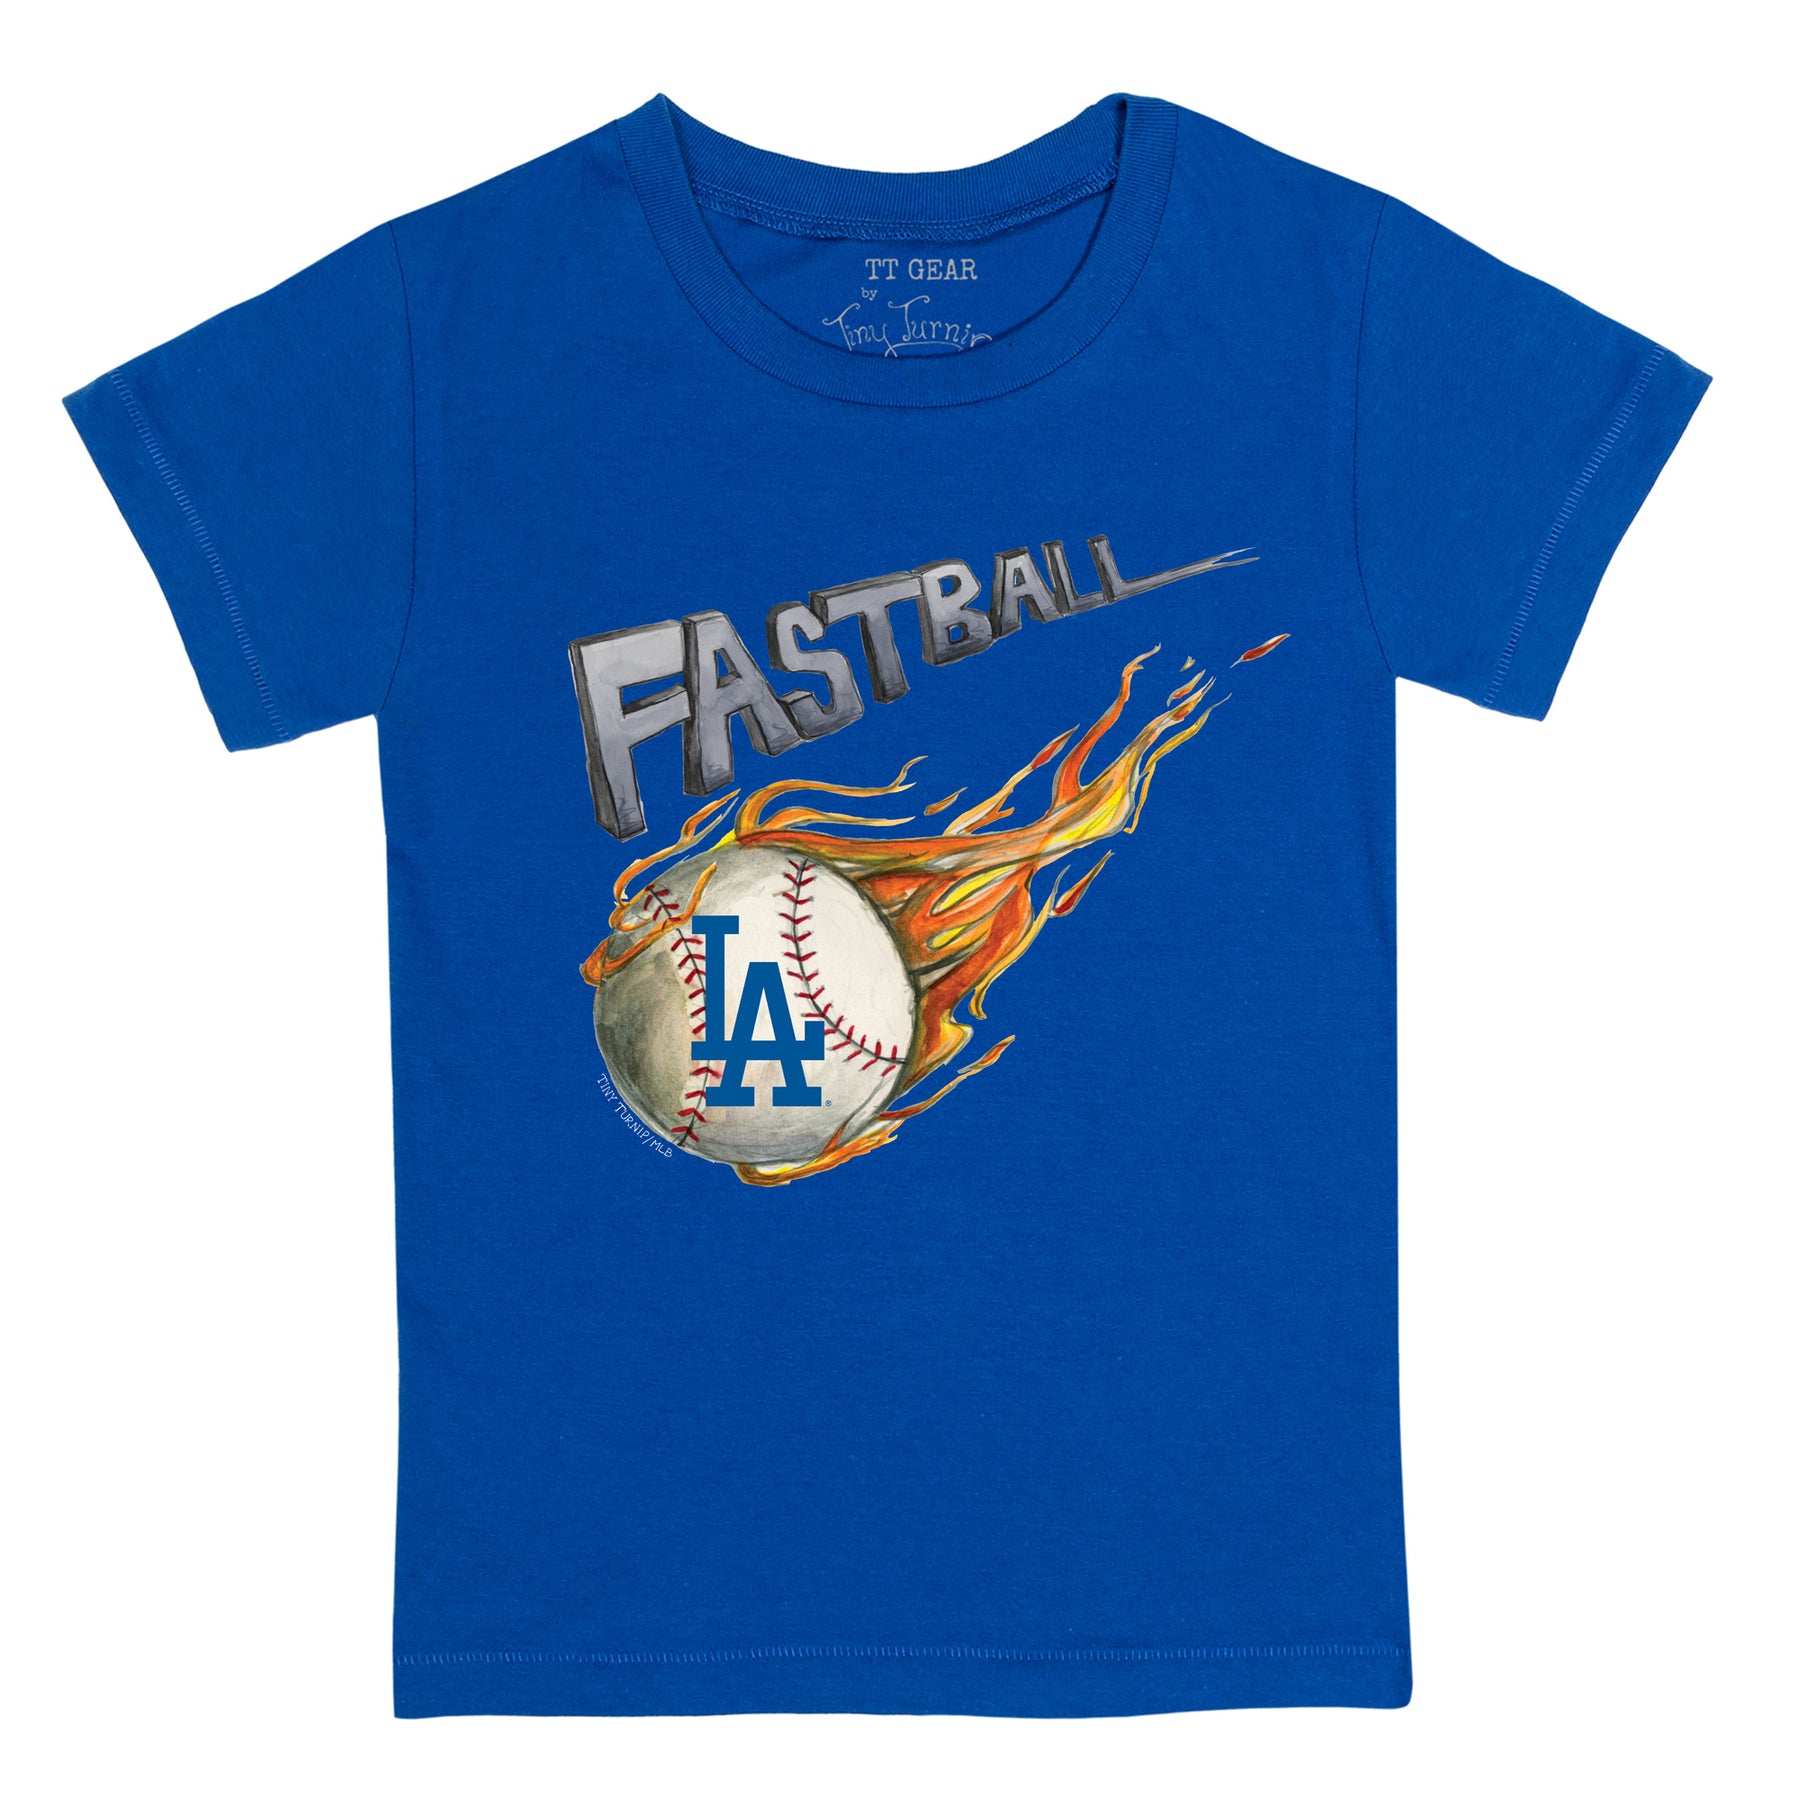 Los Angeles Dodgers Fastball Tee Shirt